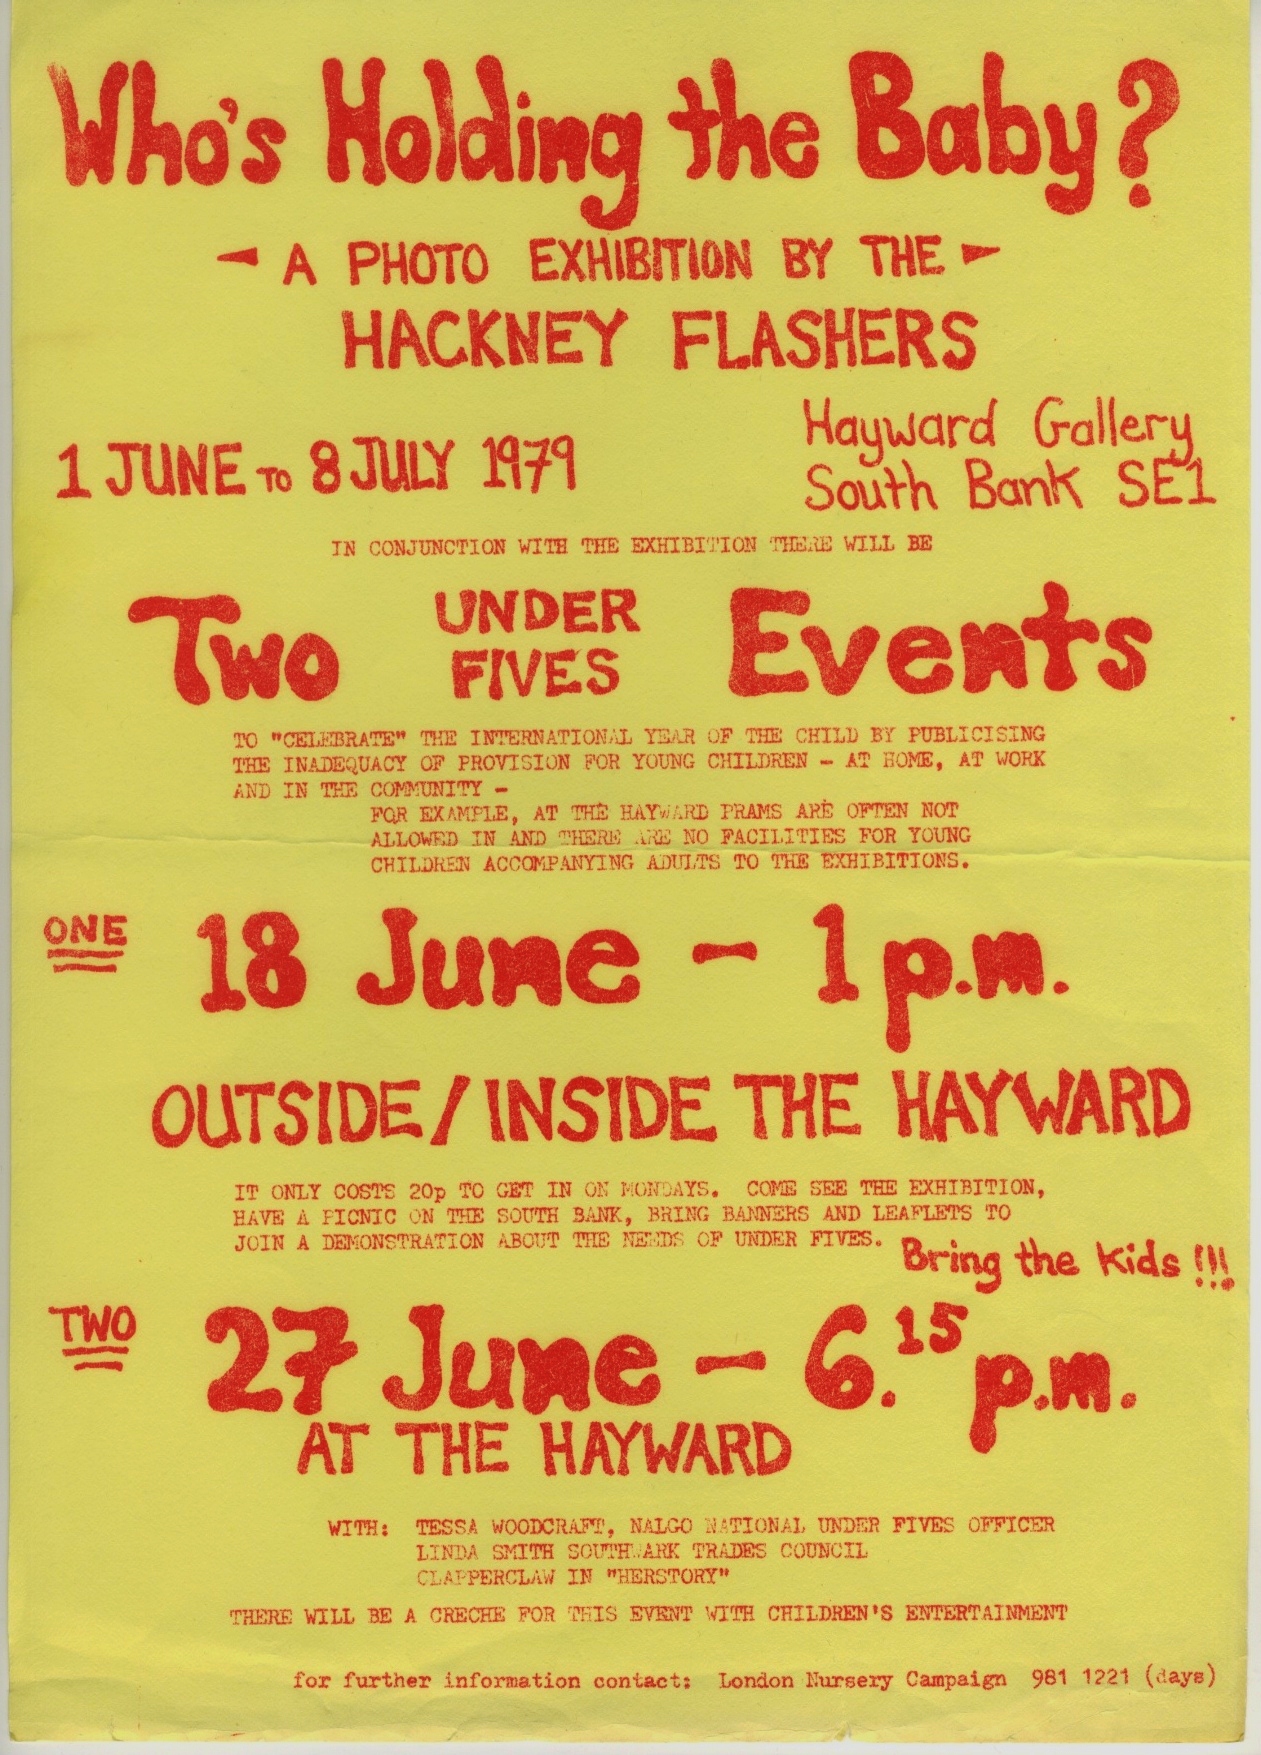 Poster for Hayward Gallery events, Archive material ©Hackney Flashers. A yellow poster with red funky text reading Who's Holding the Baby? A photo exhibition by the Hackney Flashers, 1 June to 8 July 1979. Hayward Gallery SE1. Two under fives events, outside/inside the Hayward.